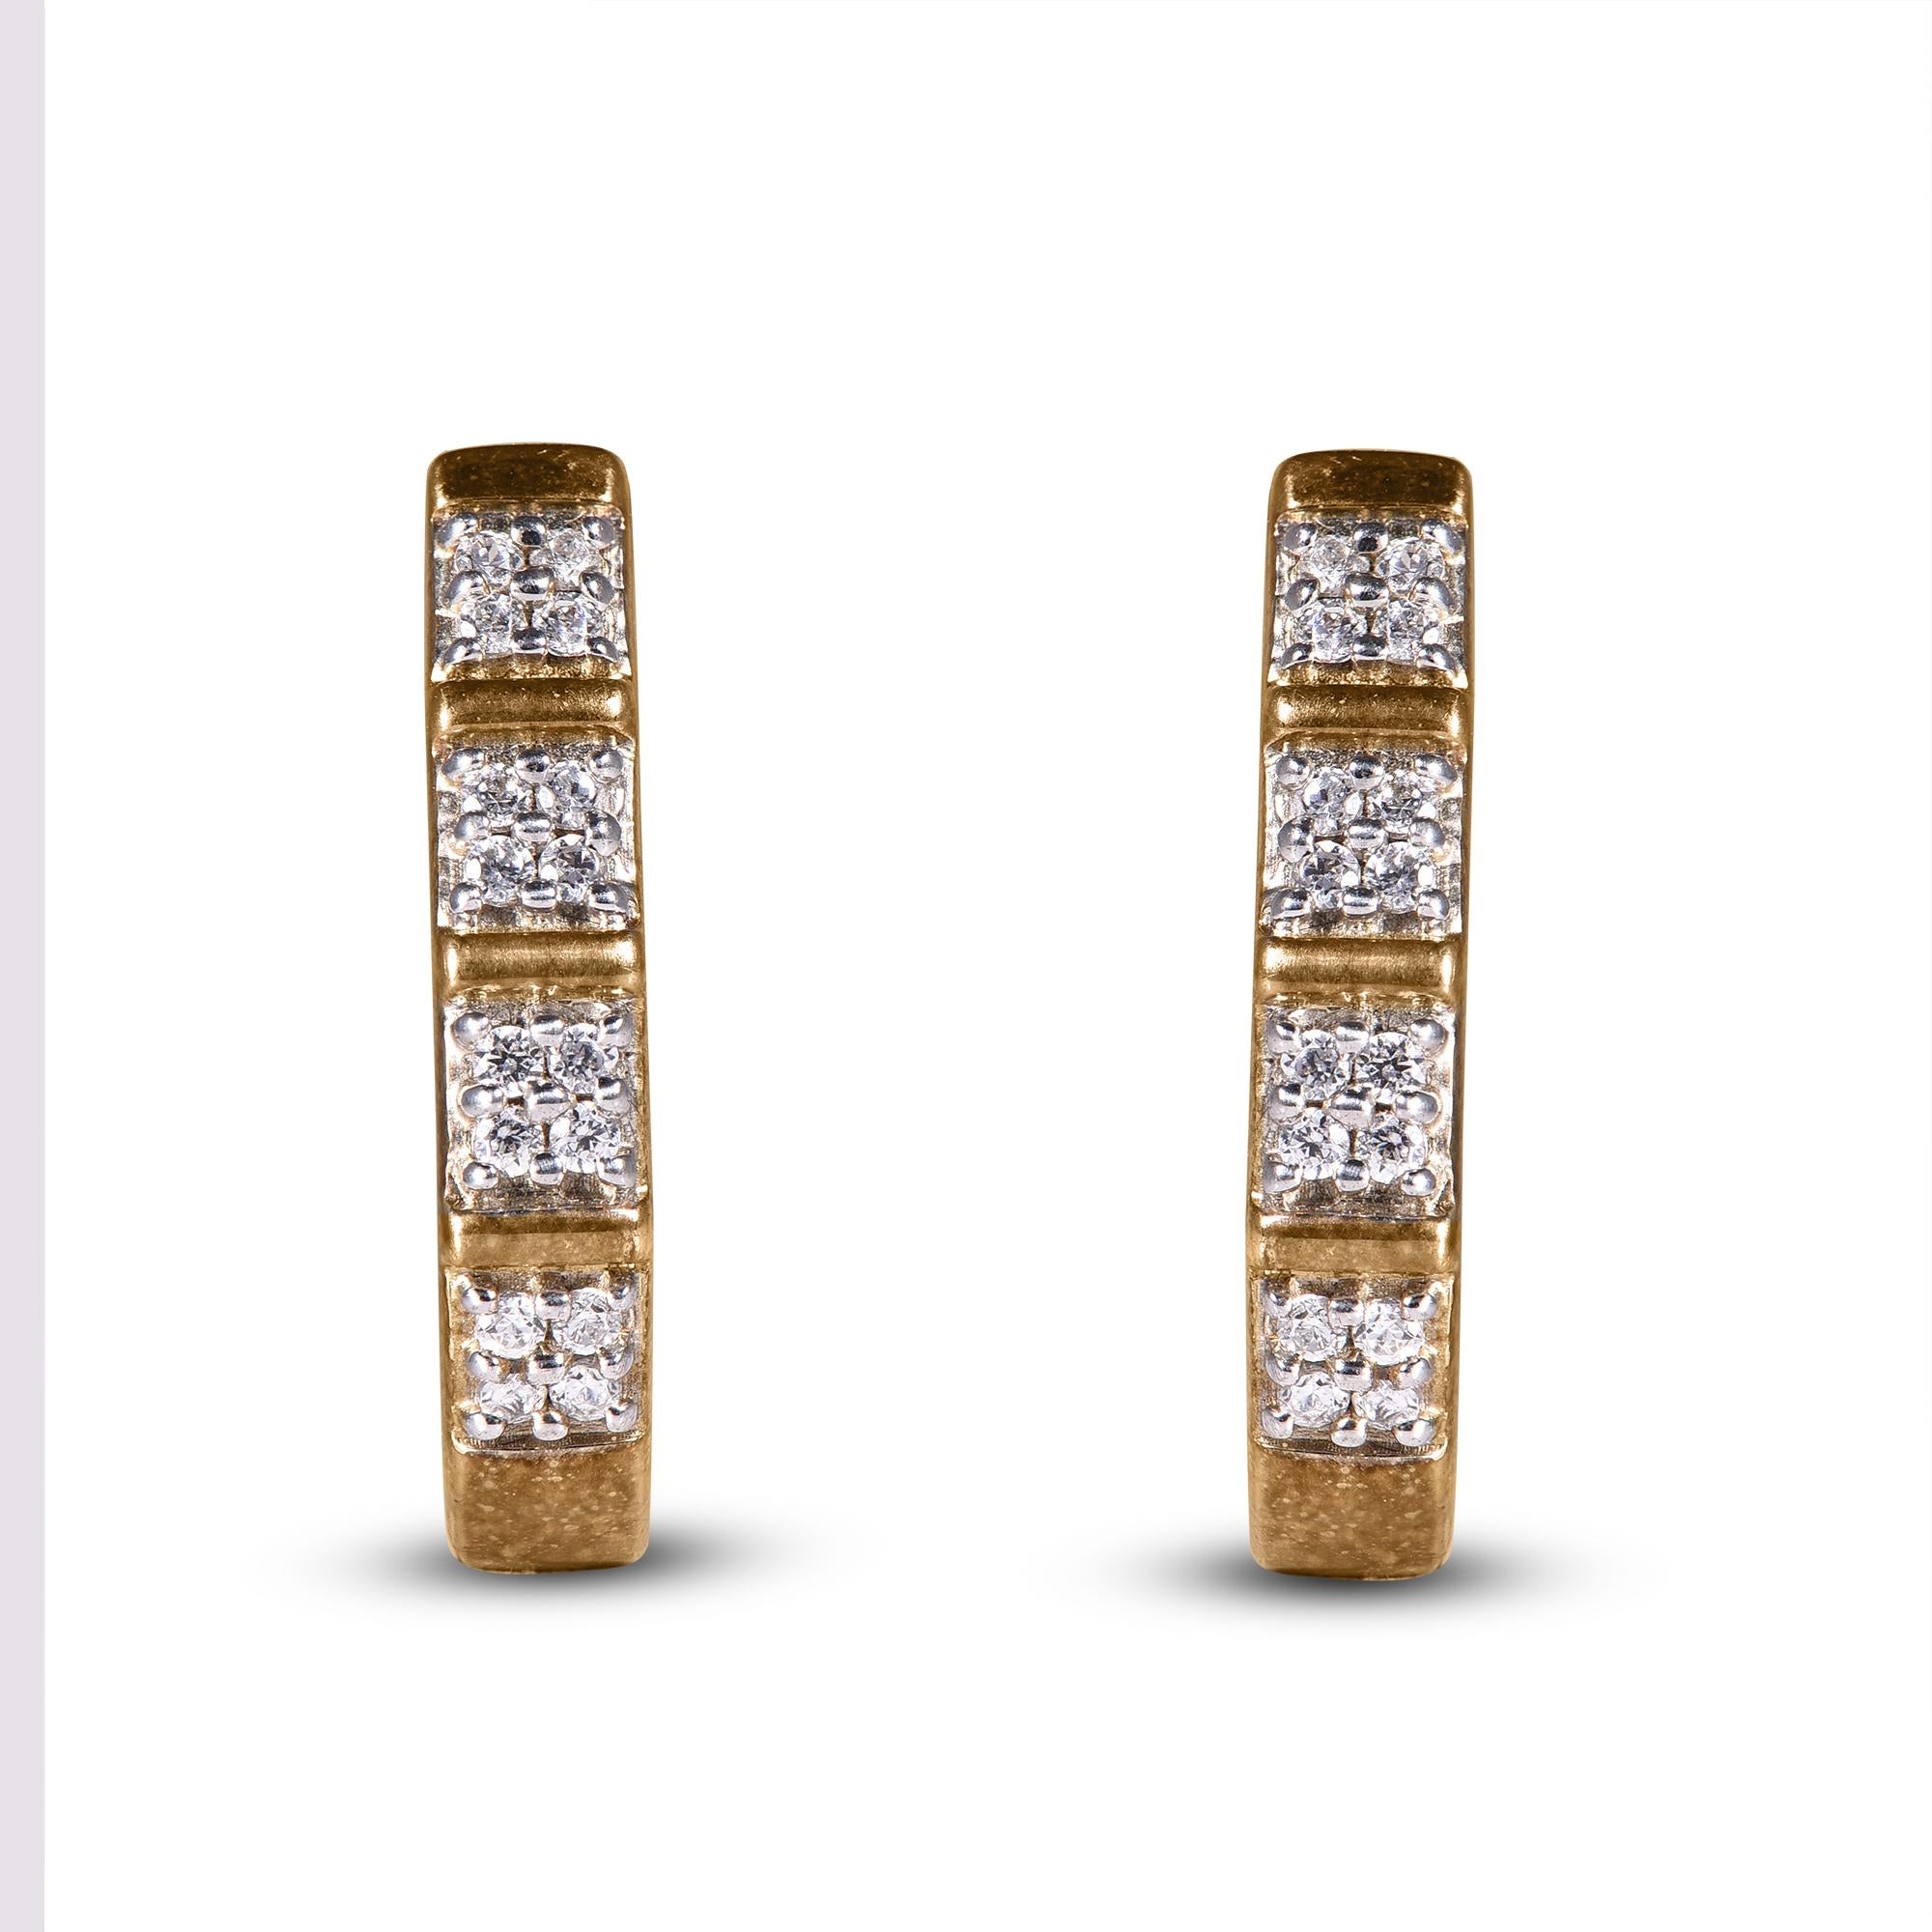 These exquisite diamond huggie earrings offer beauty equaled only to her own.These earrings feature clusters of 32 round brilliant dazzling diamond set in prong setting, and shines brightly in H-I color I2 clarity. These timeless hoop earrings that